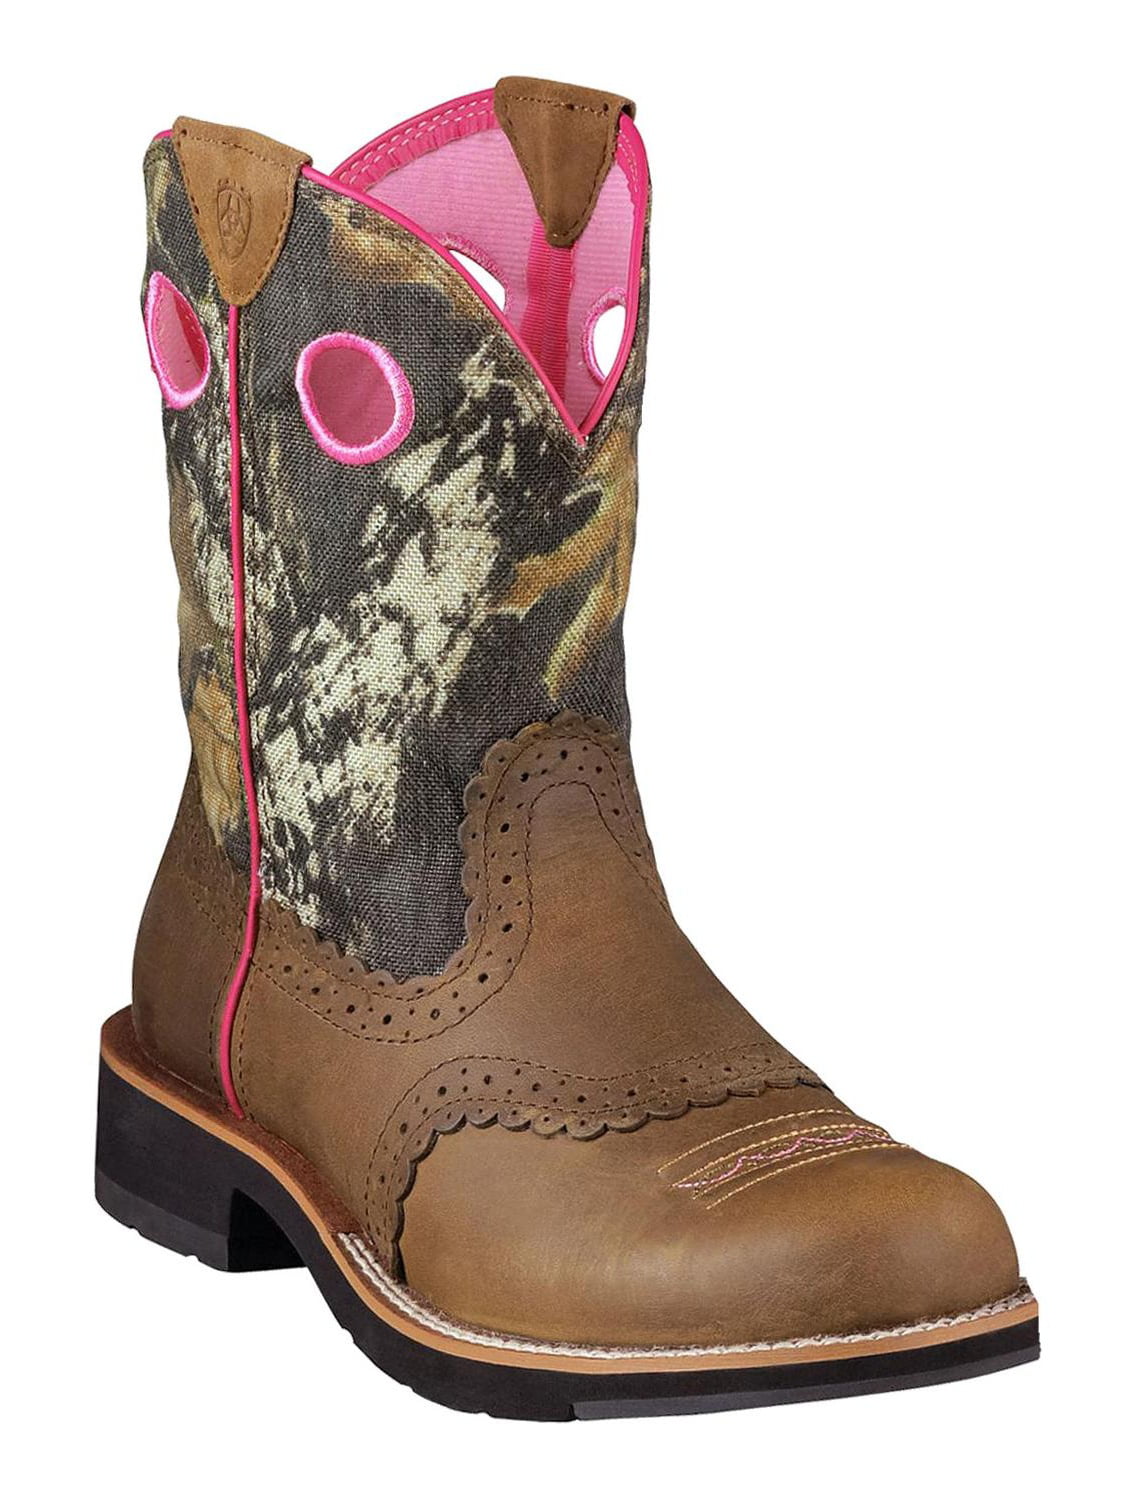 ariat women's camo fatbaby cowgirl boots